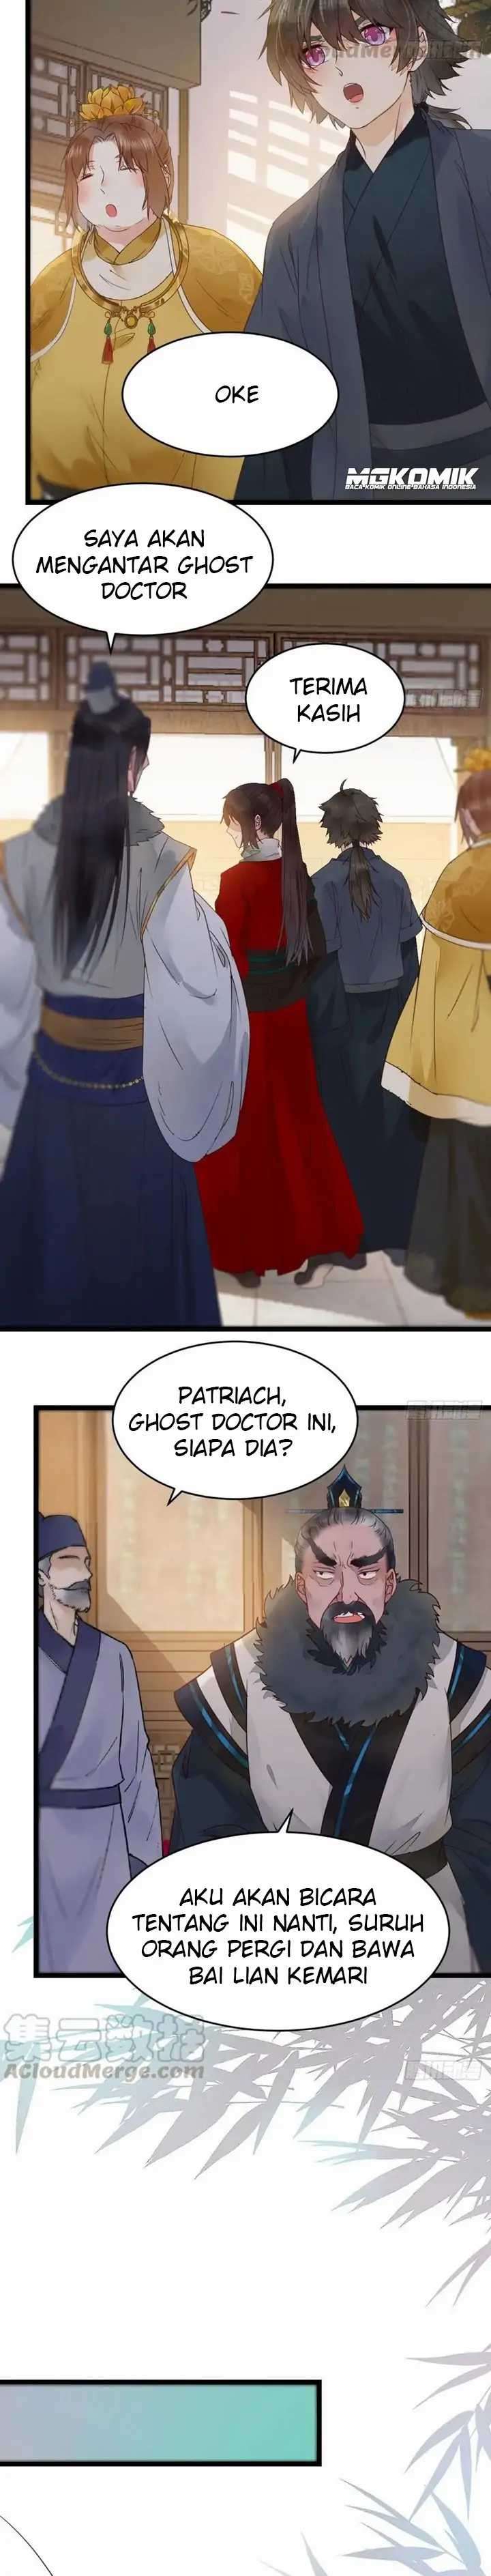 The Ghostly Doctor Chapter 375 5